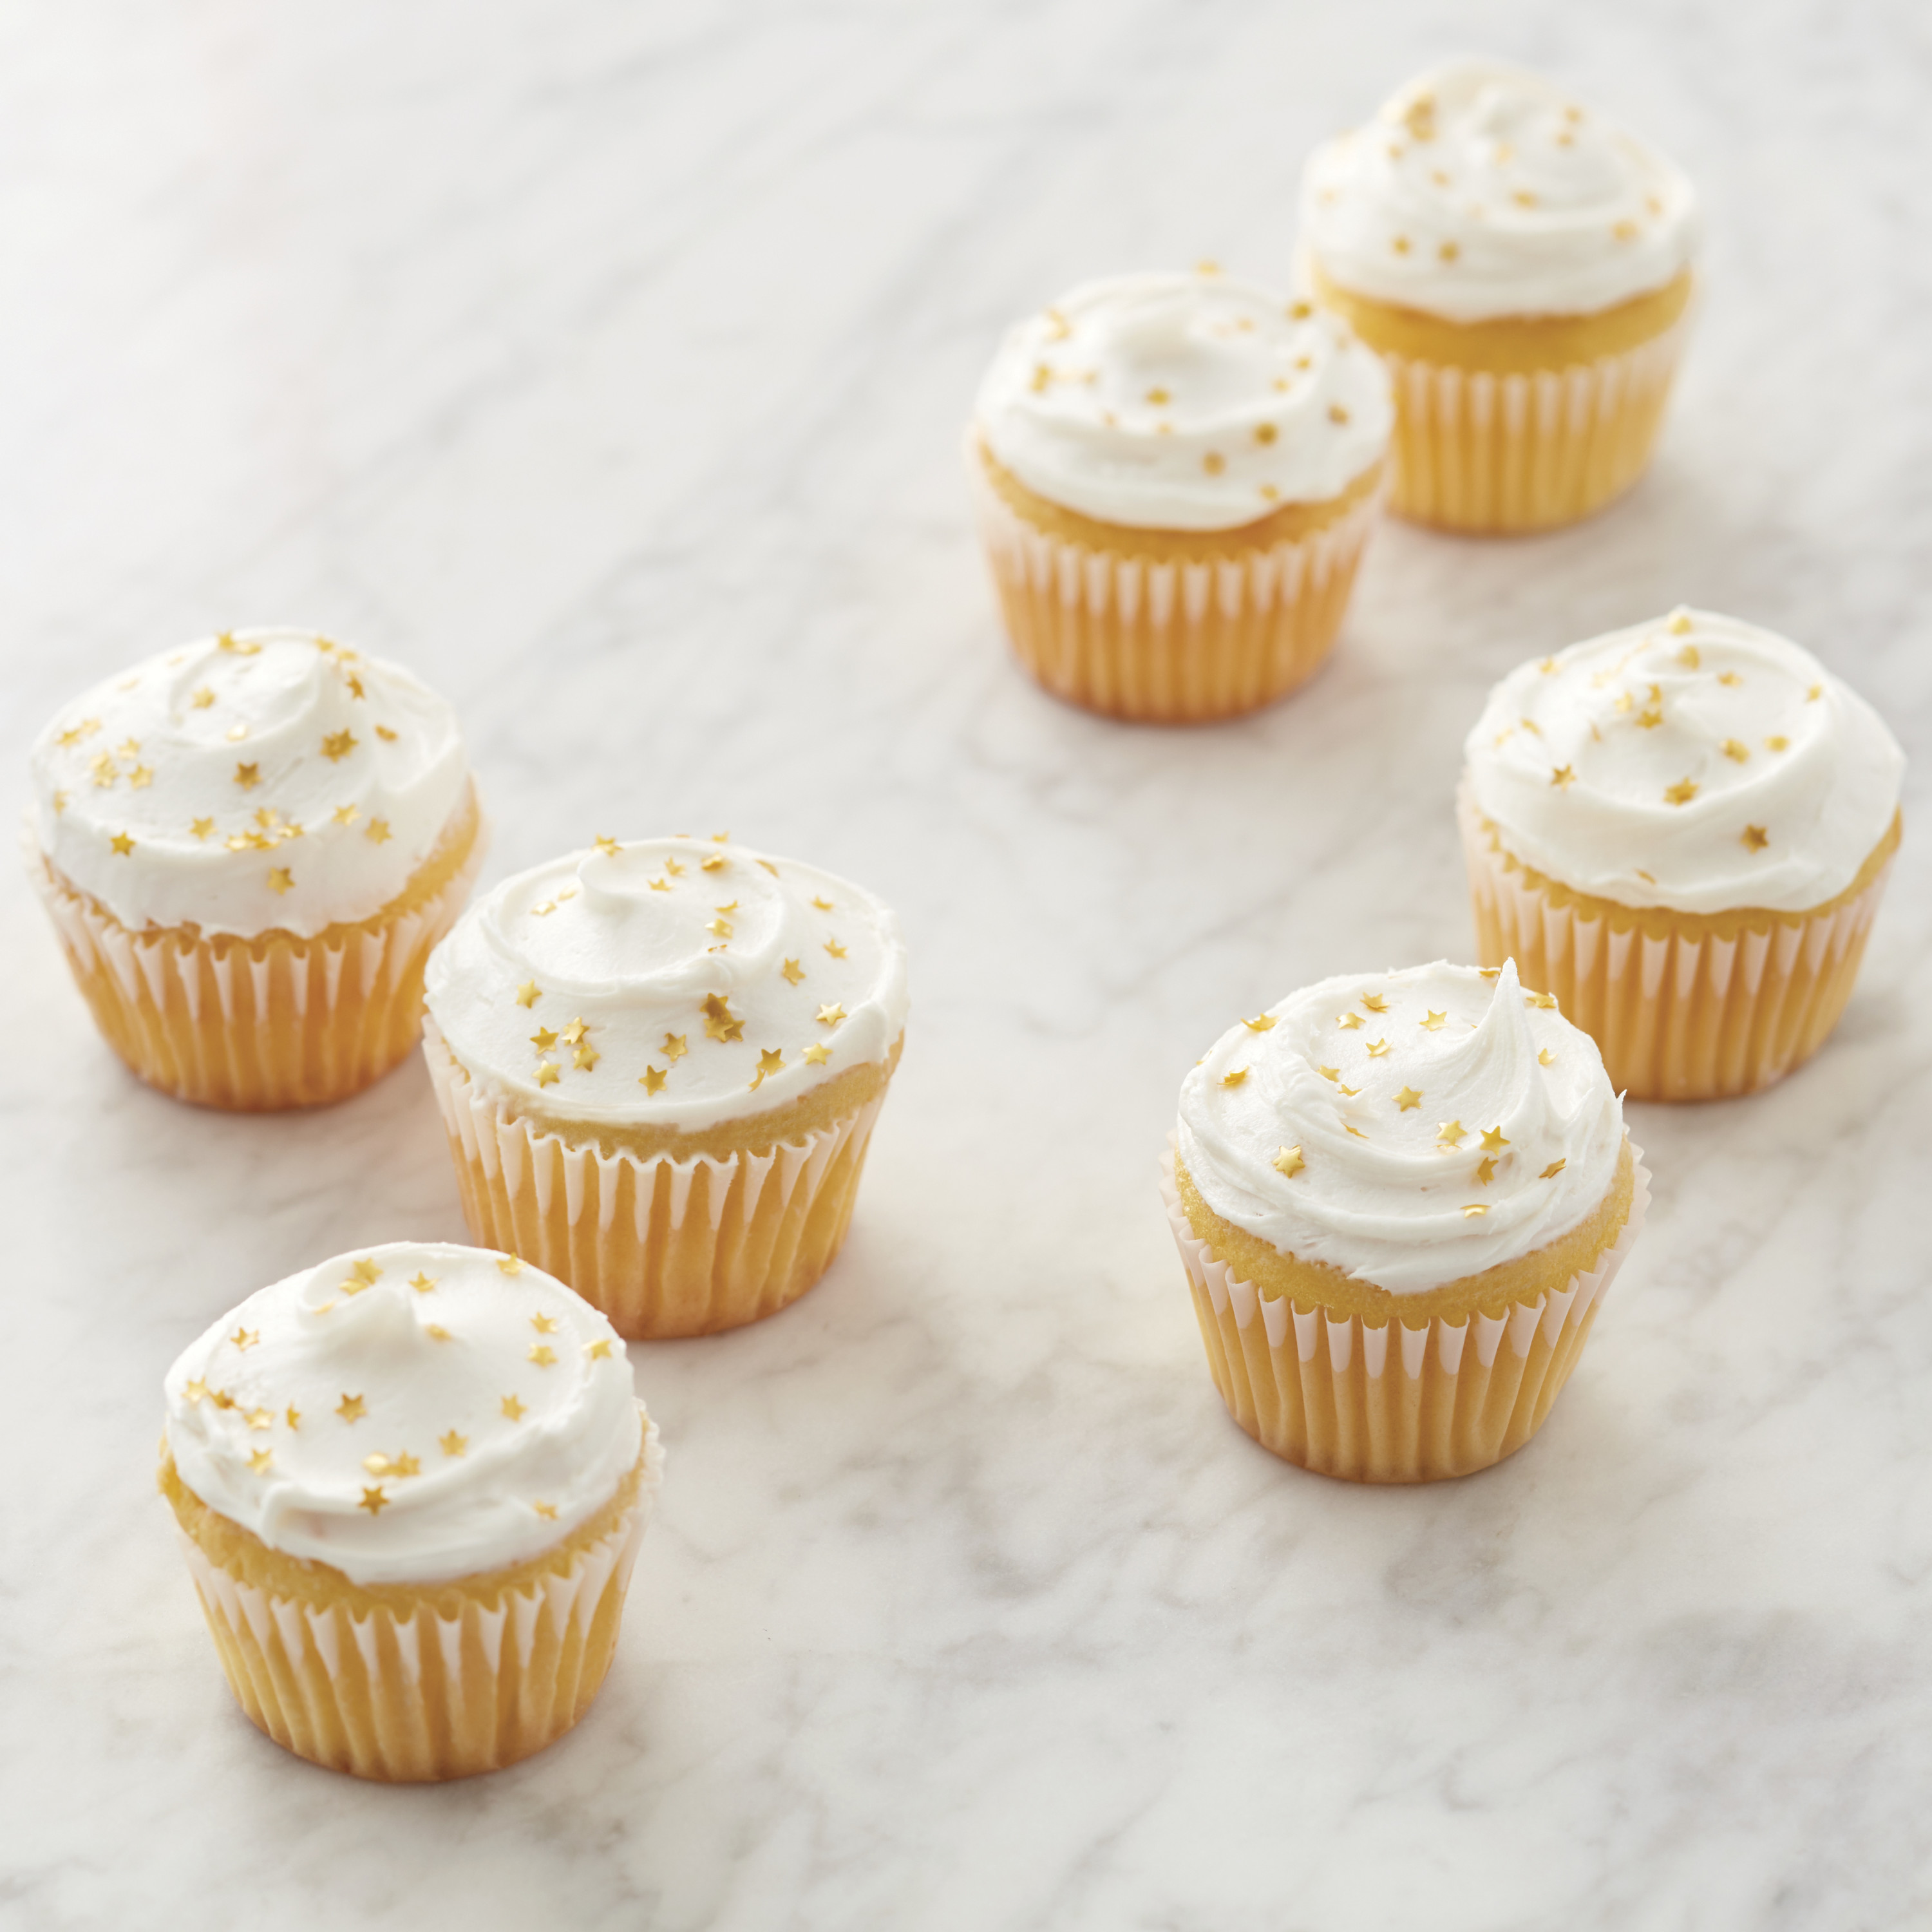 Wilton Gold Stars Edible Accents - image 5 of 9